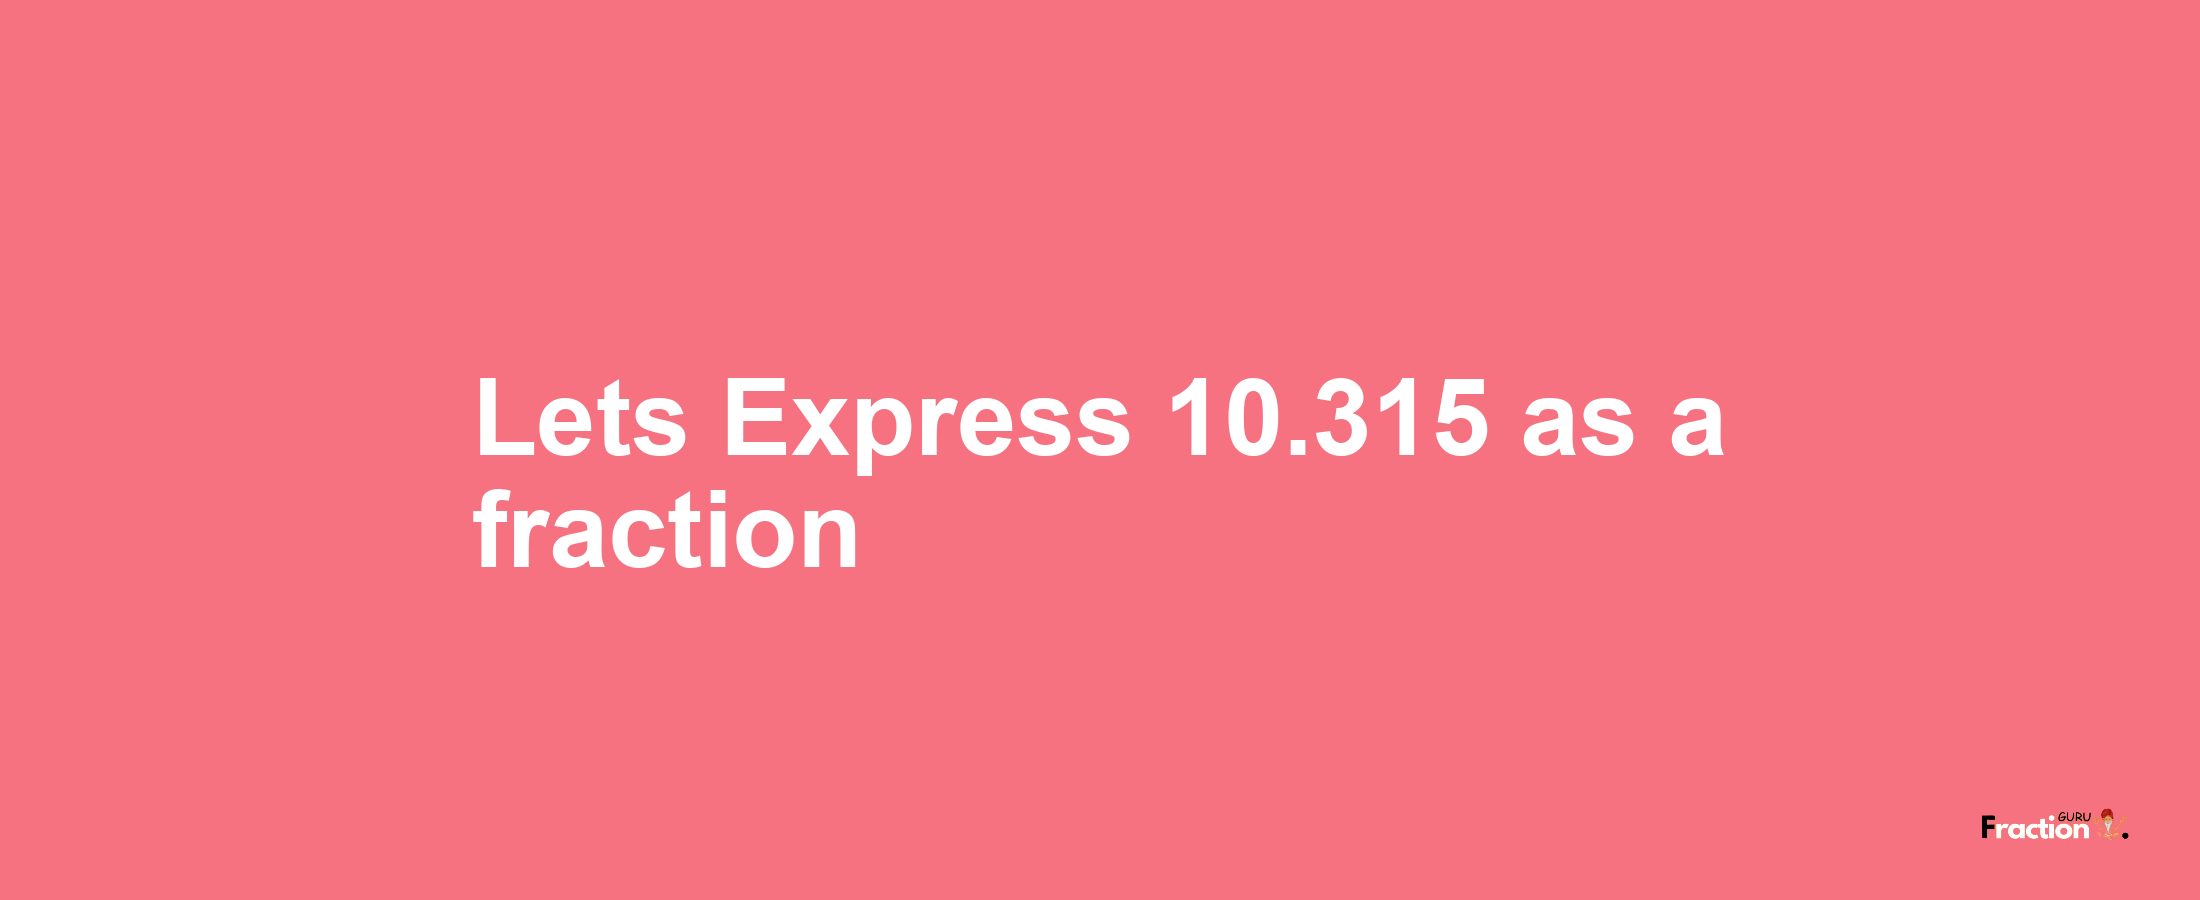 Lets Express 10.315 as afraction